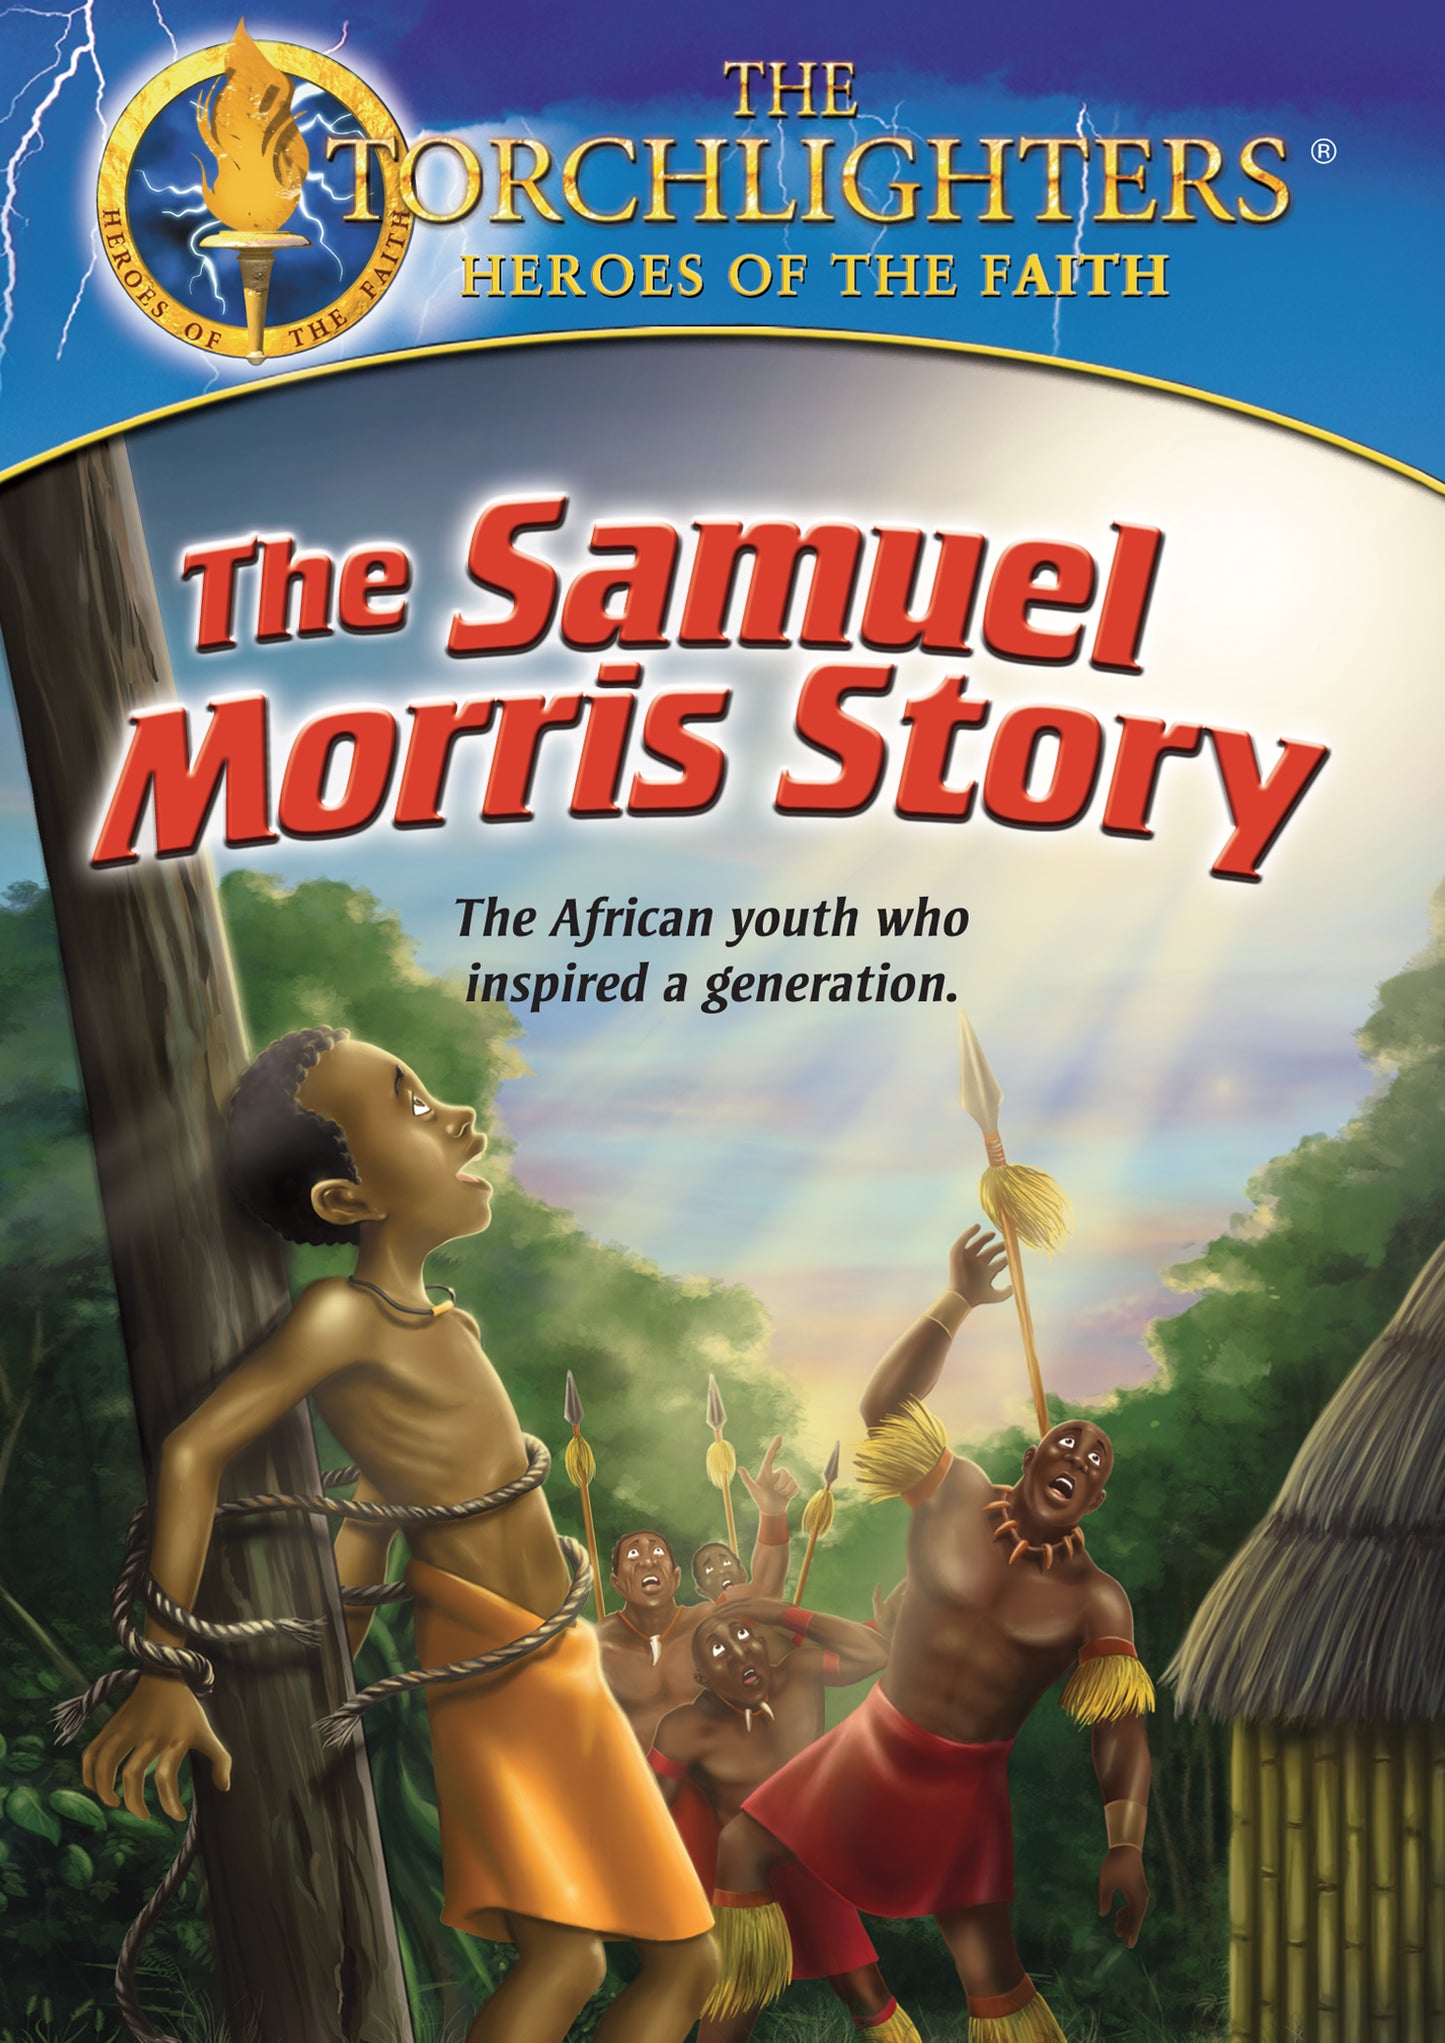 Torchlighters: The Samuel Morris Story cover art